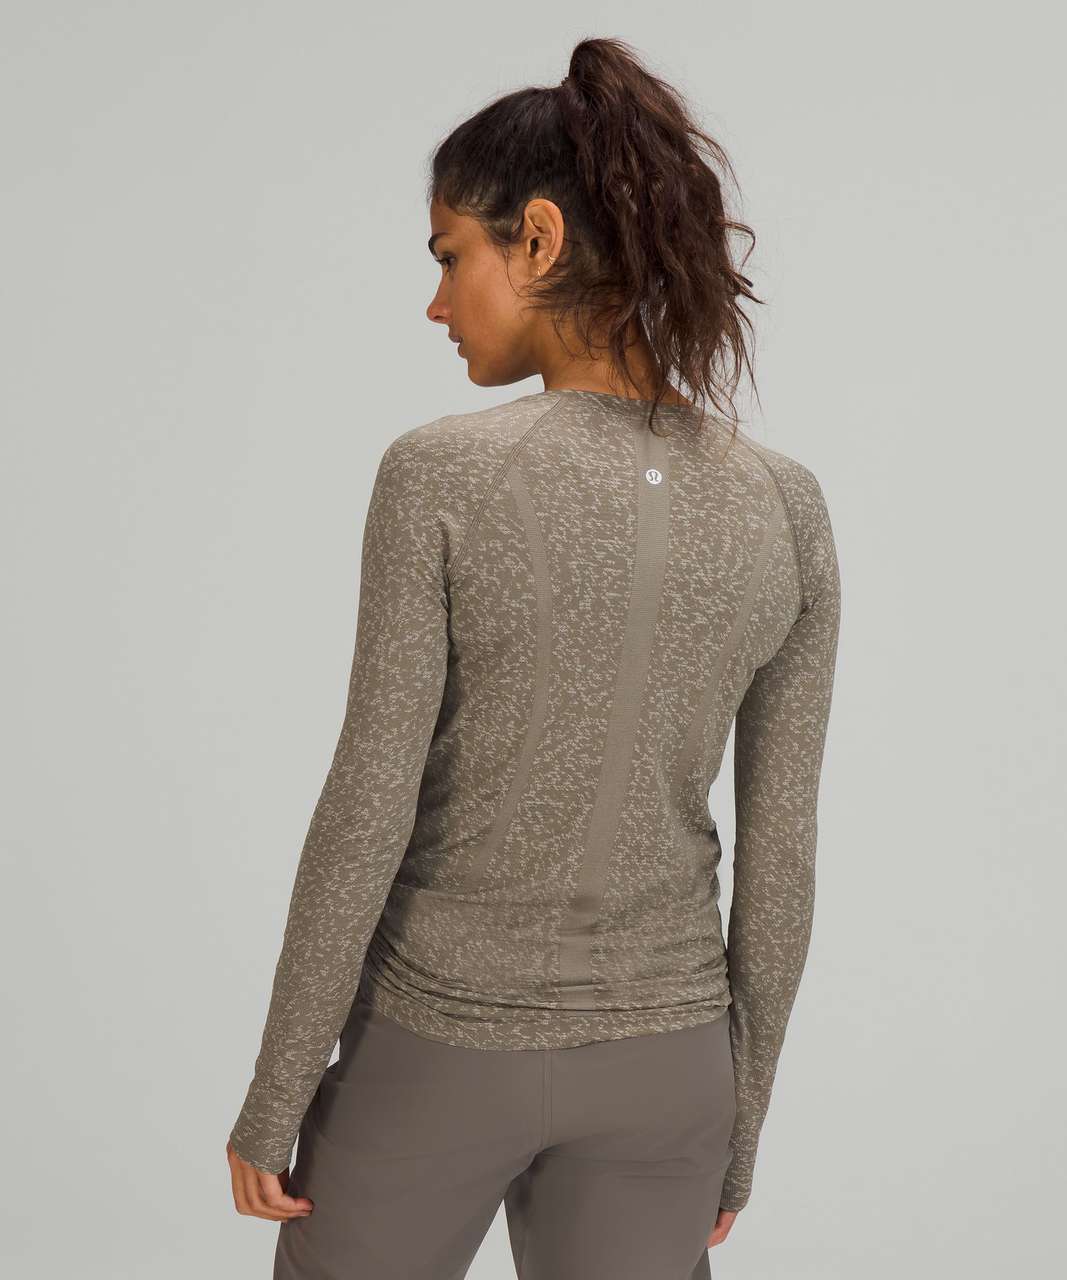 Lululemon Swiftly Tech Long Sleeve Shirt 2.0 - Distorted Static Rover / White Opal